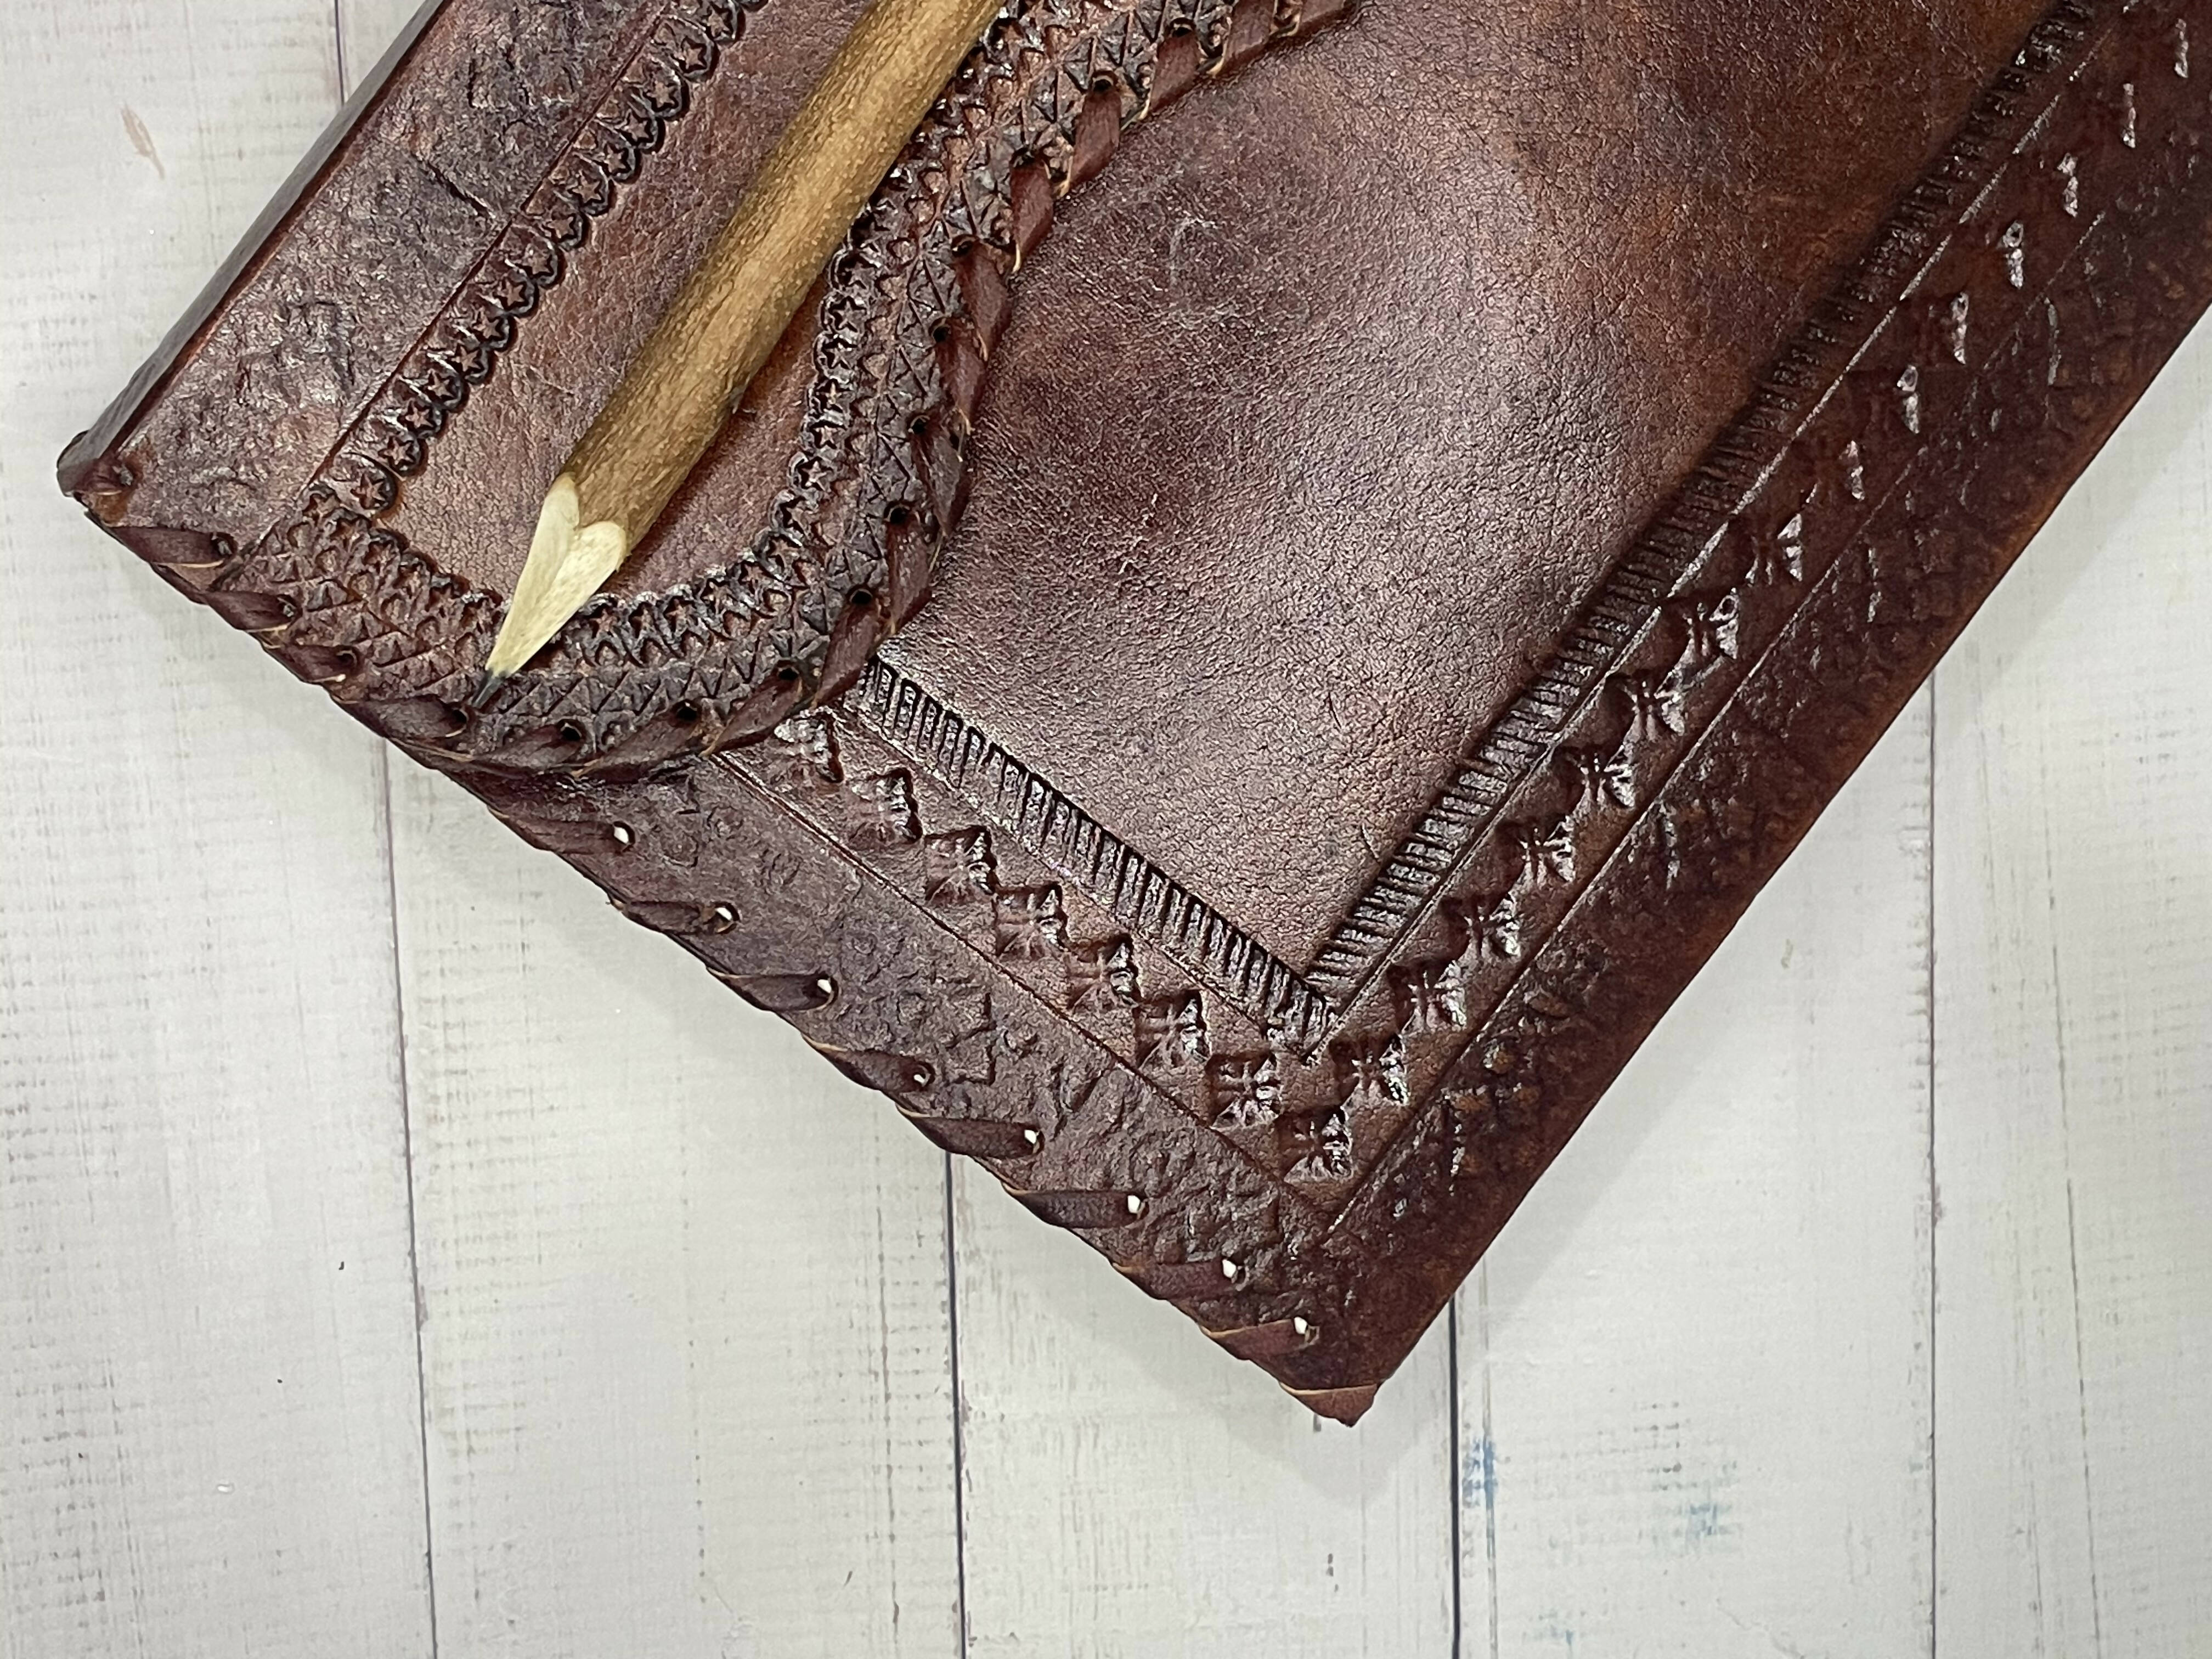 Leather Diary with wooden pencil